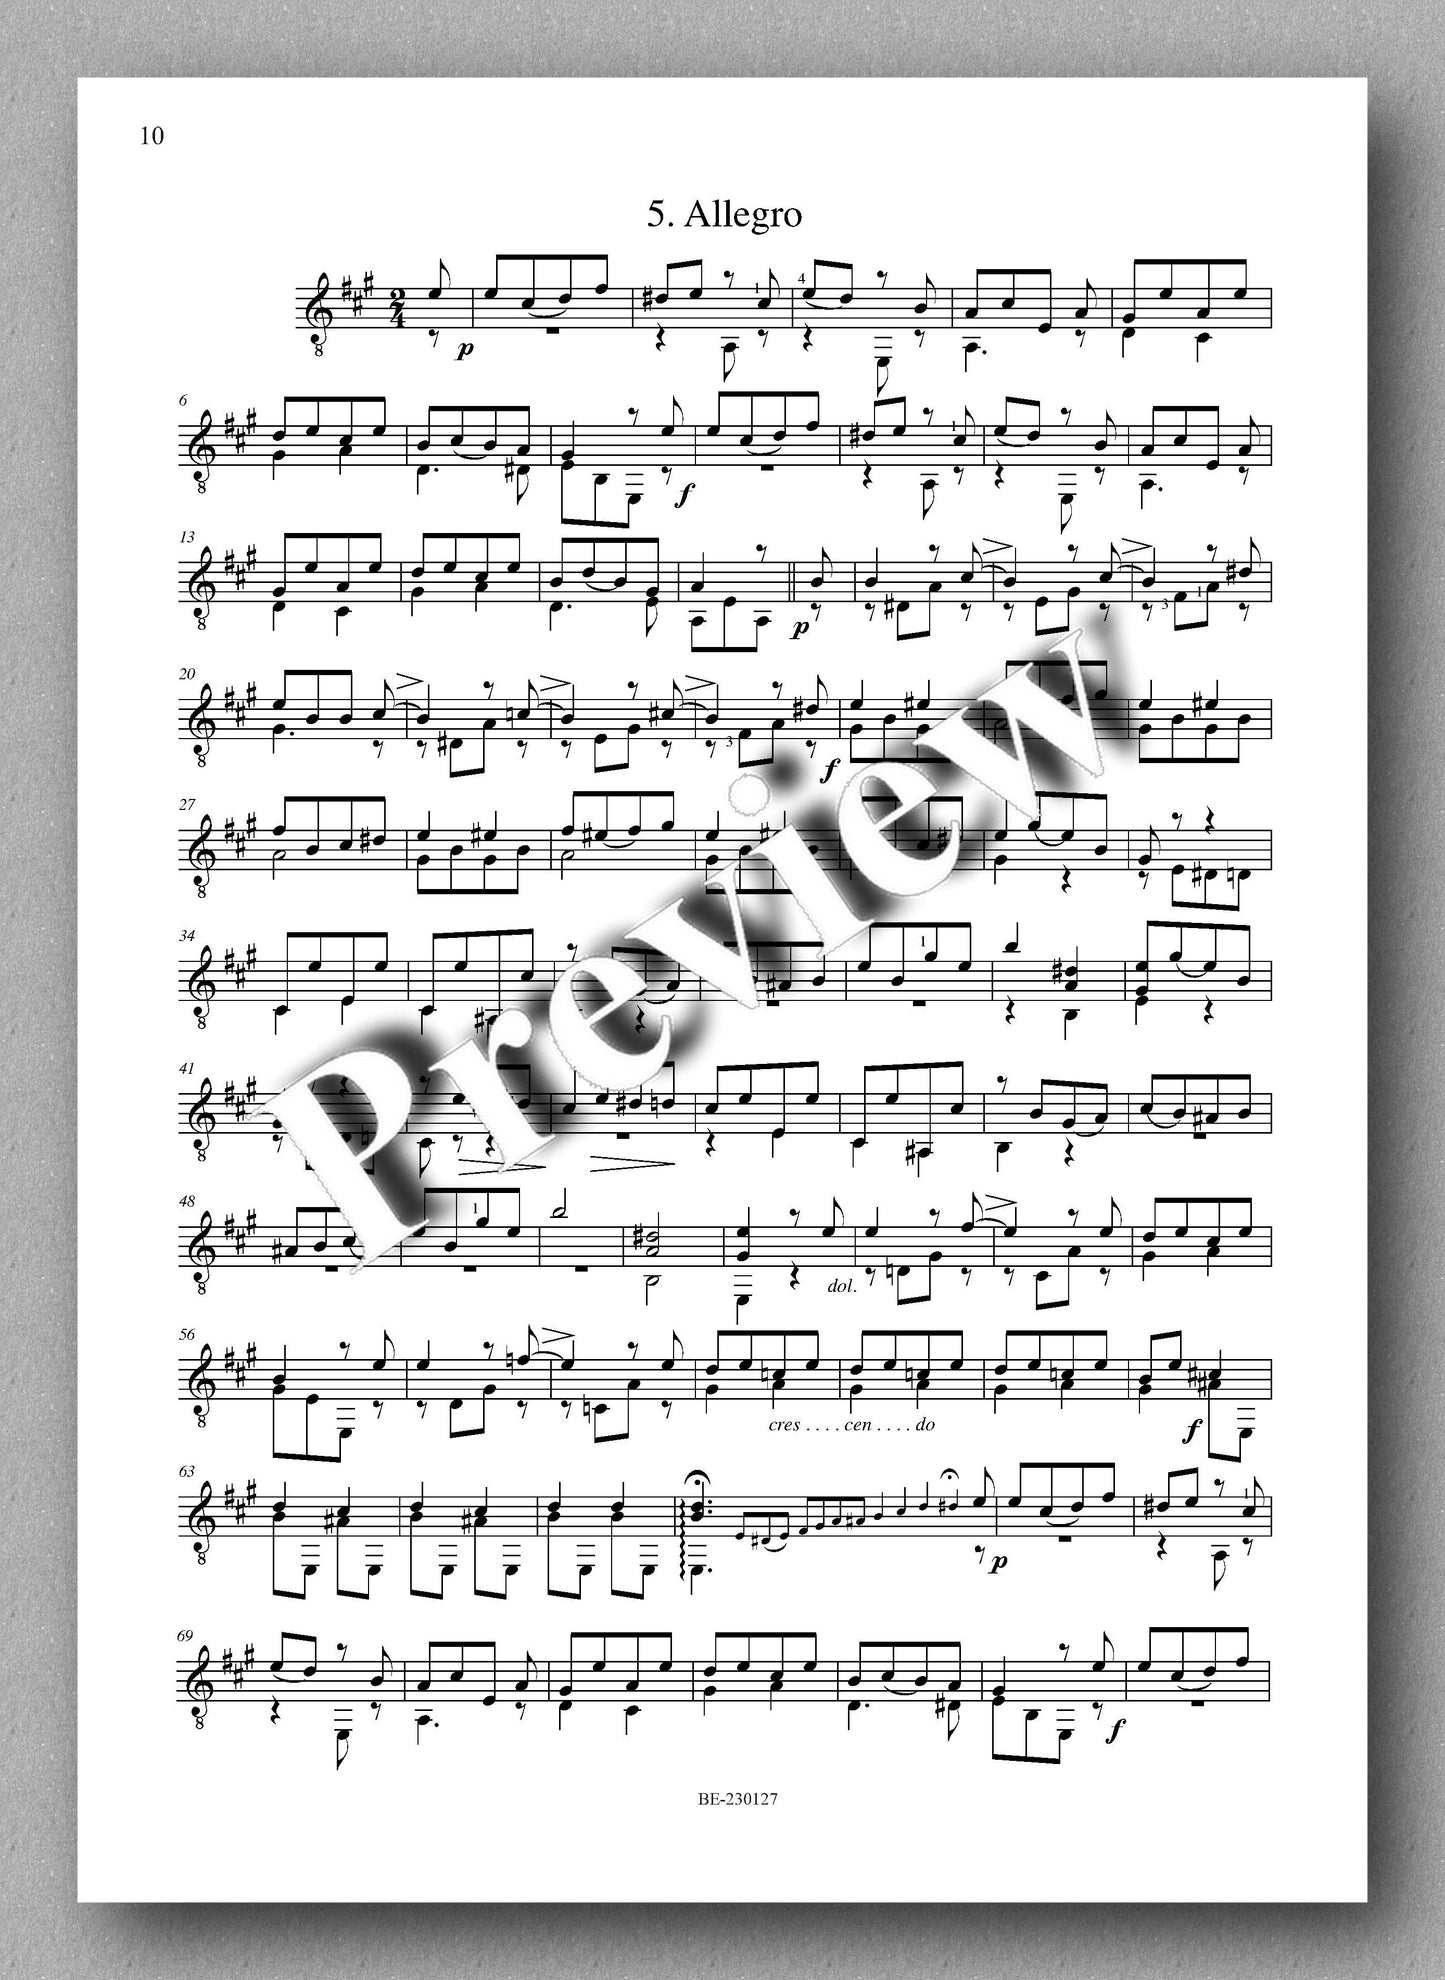 Molino, Collected Works for Guitar Solo, Vol. 39 - preview of the music score 2